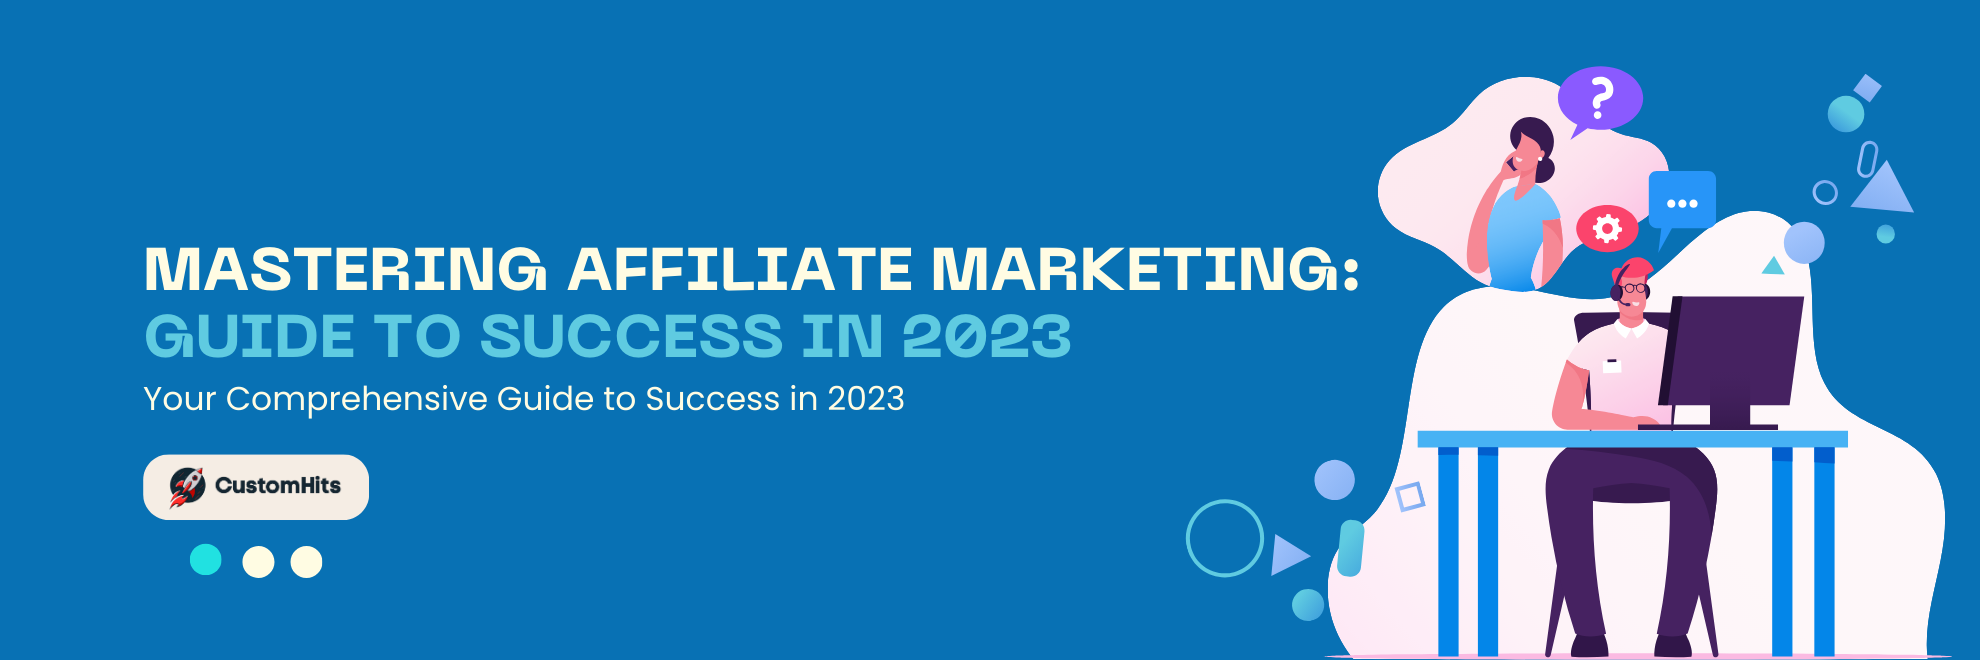 Mastering Affiliate Marketing: Your Comprehensive Guide to Success in 2023